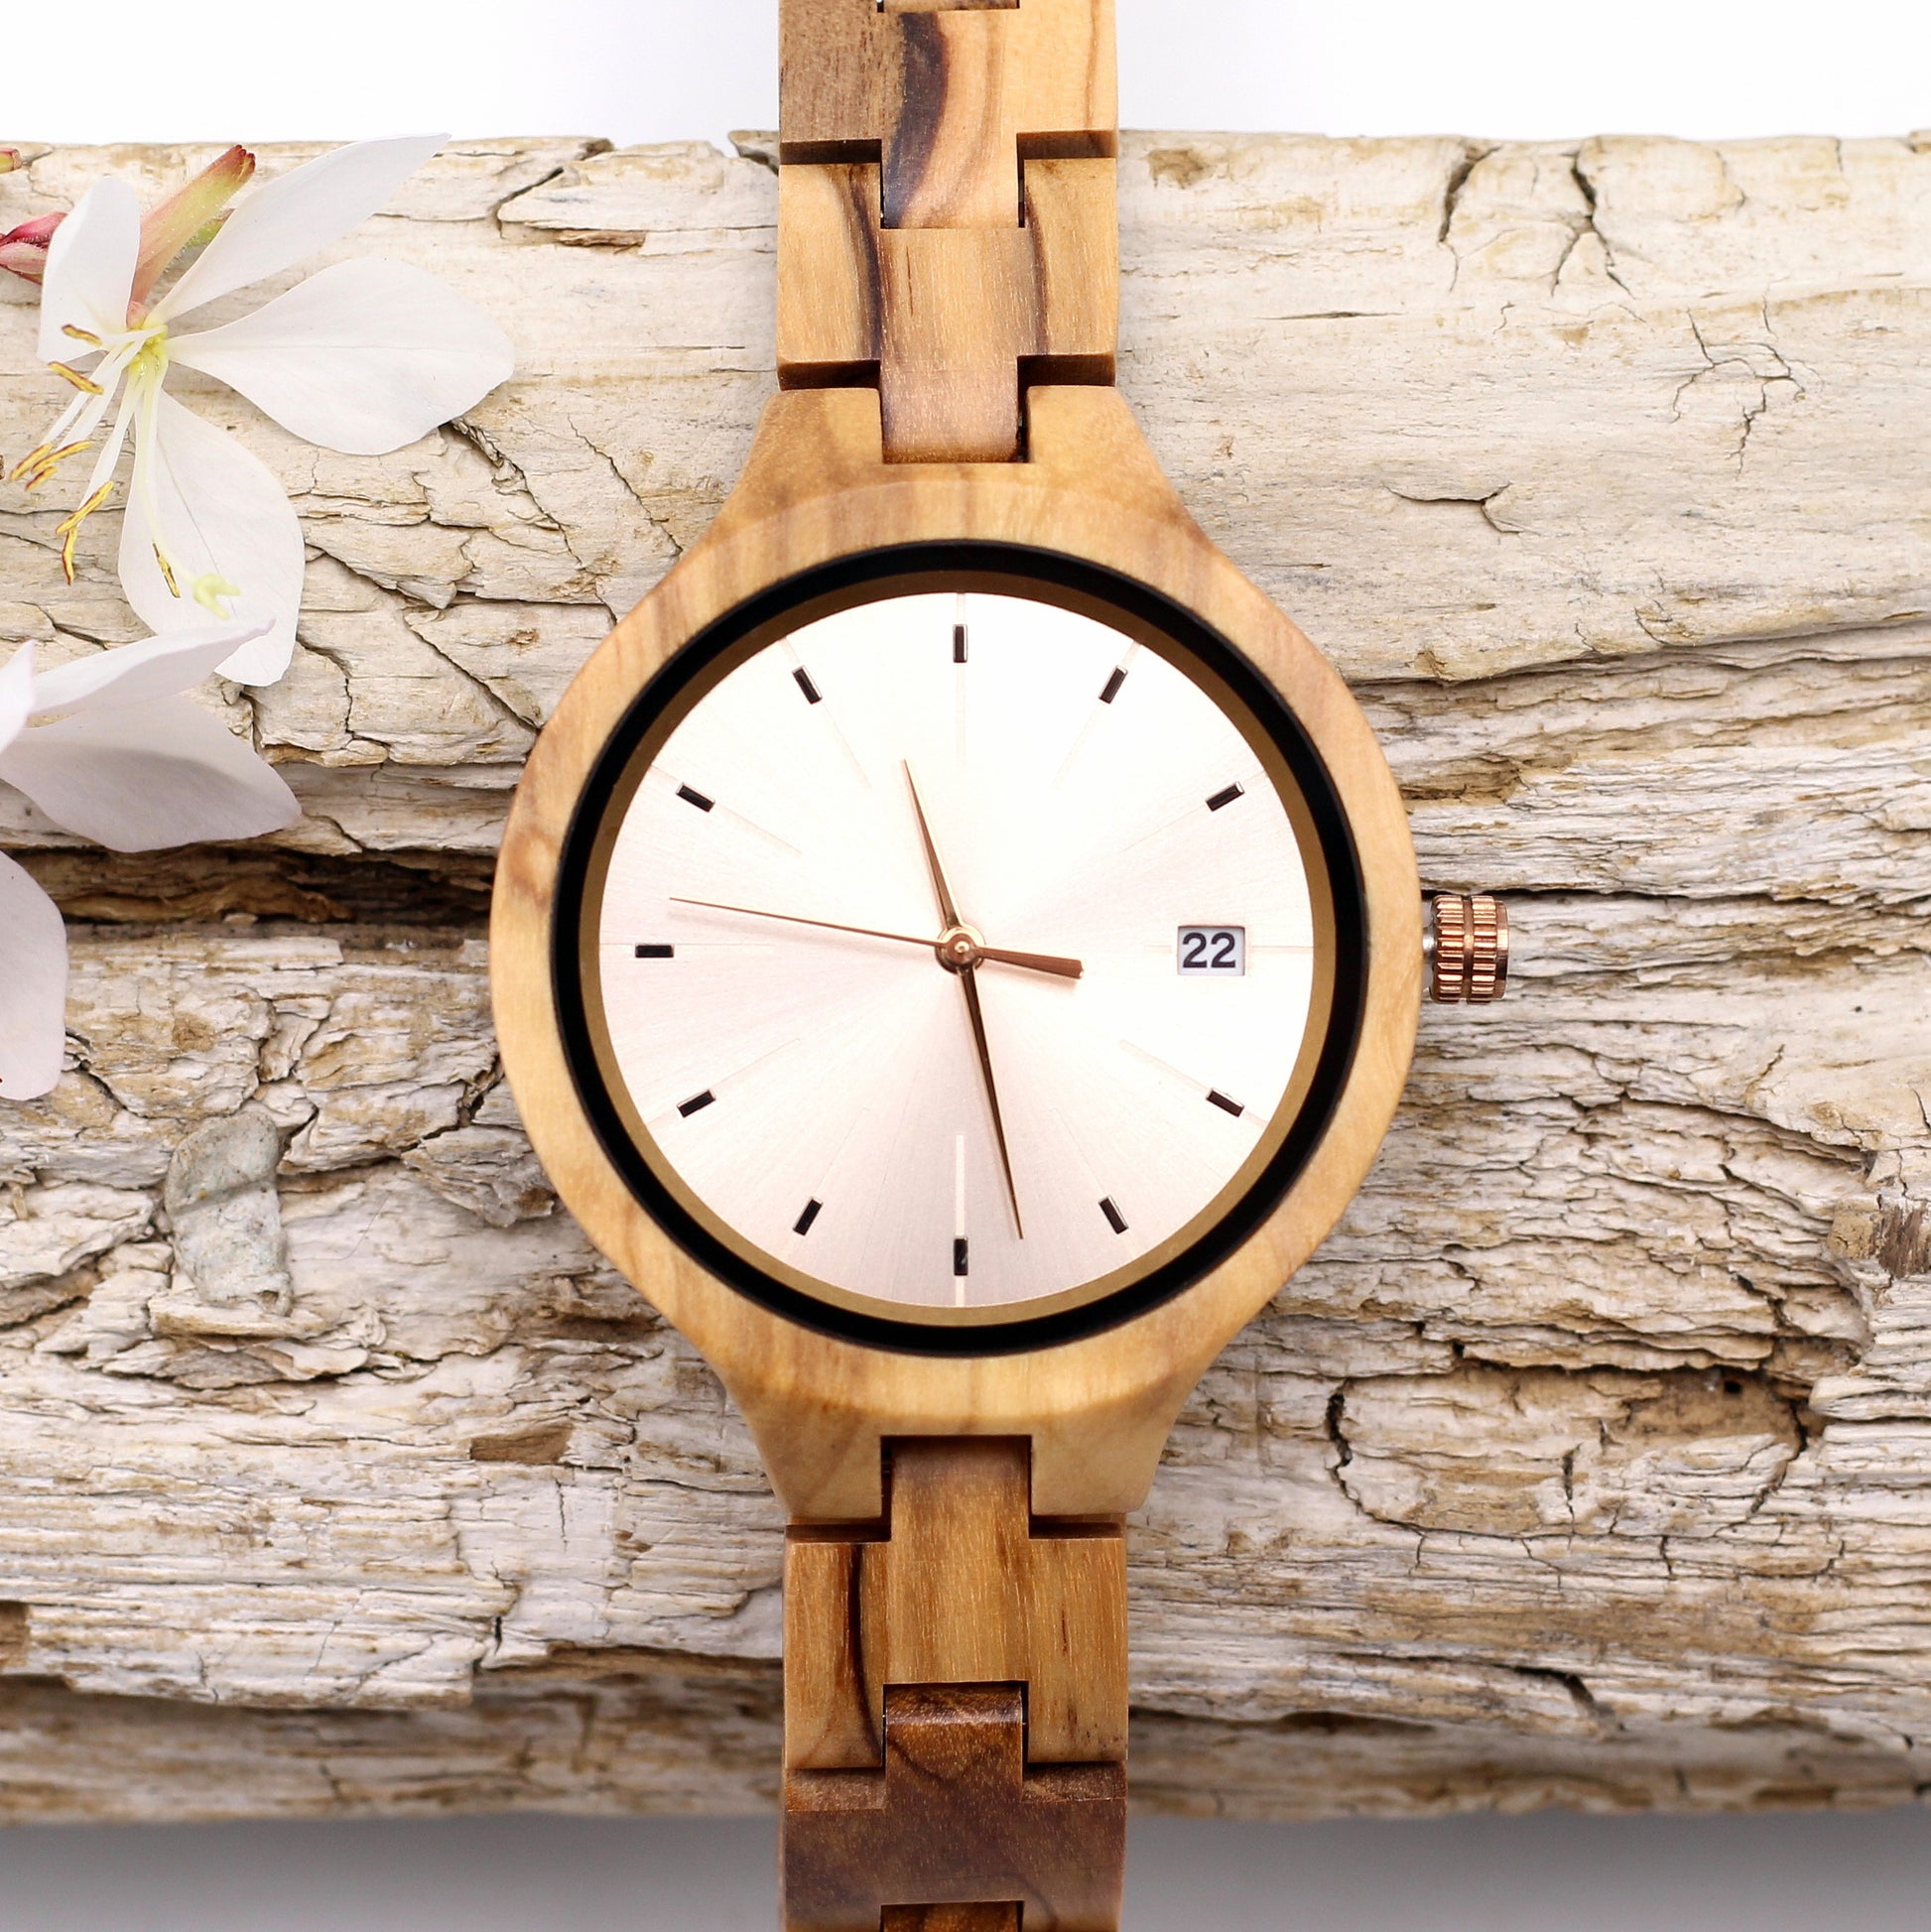 VERONA OLIVE ROSE Ladies Solid Wooden Watch with DATE function - Hashtag Bamboo